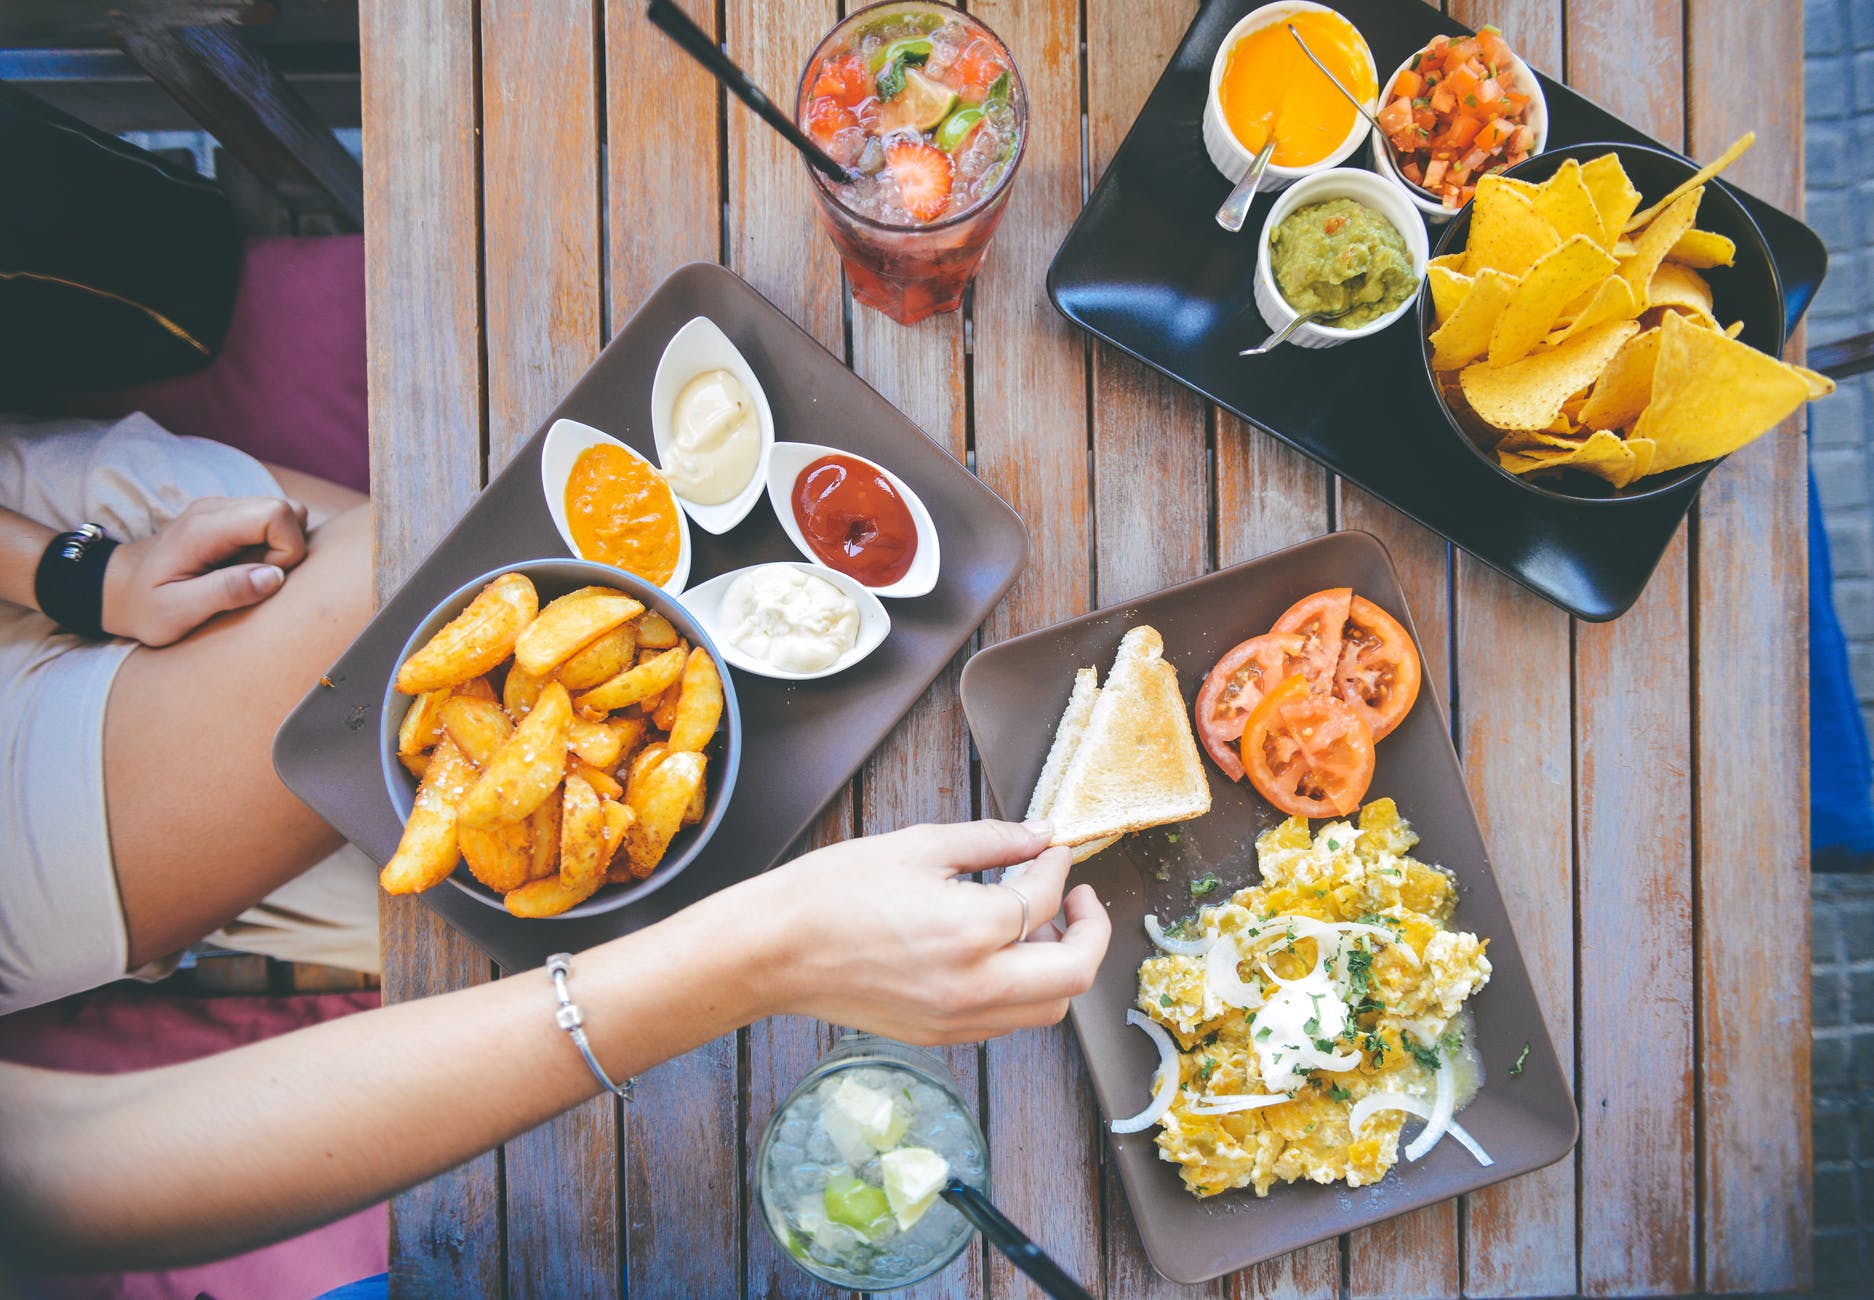 Image of nachos and other dishes being shared